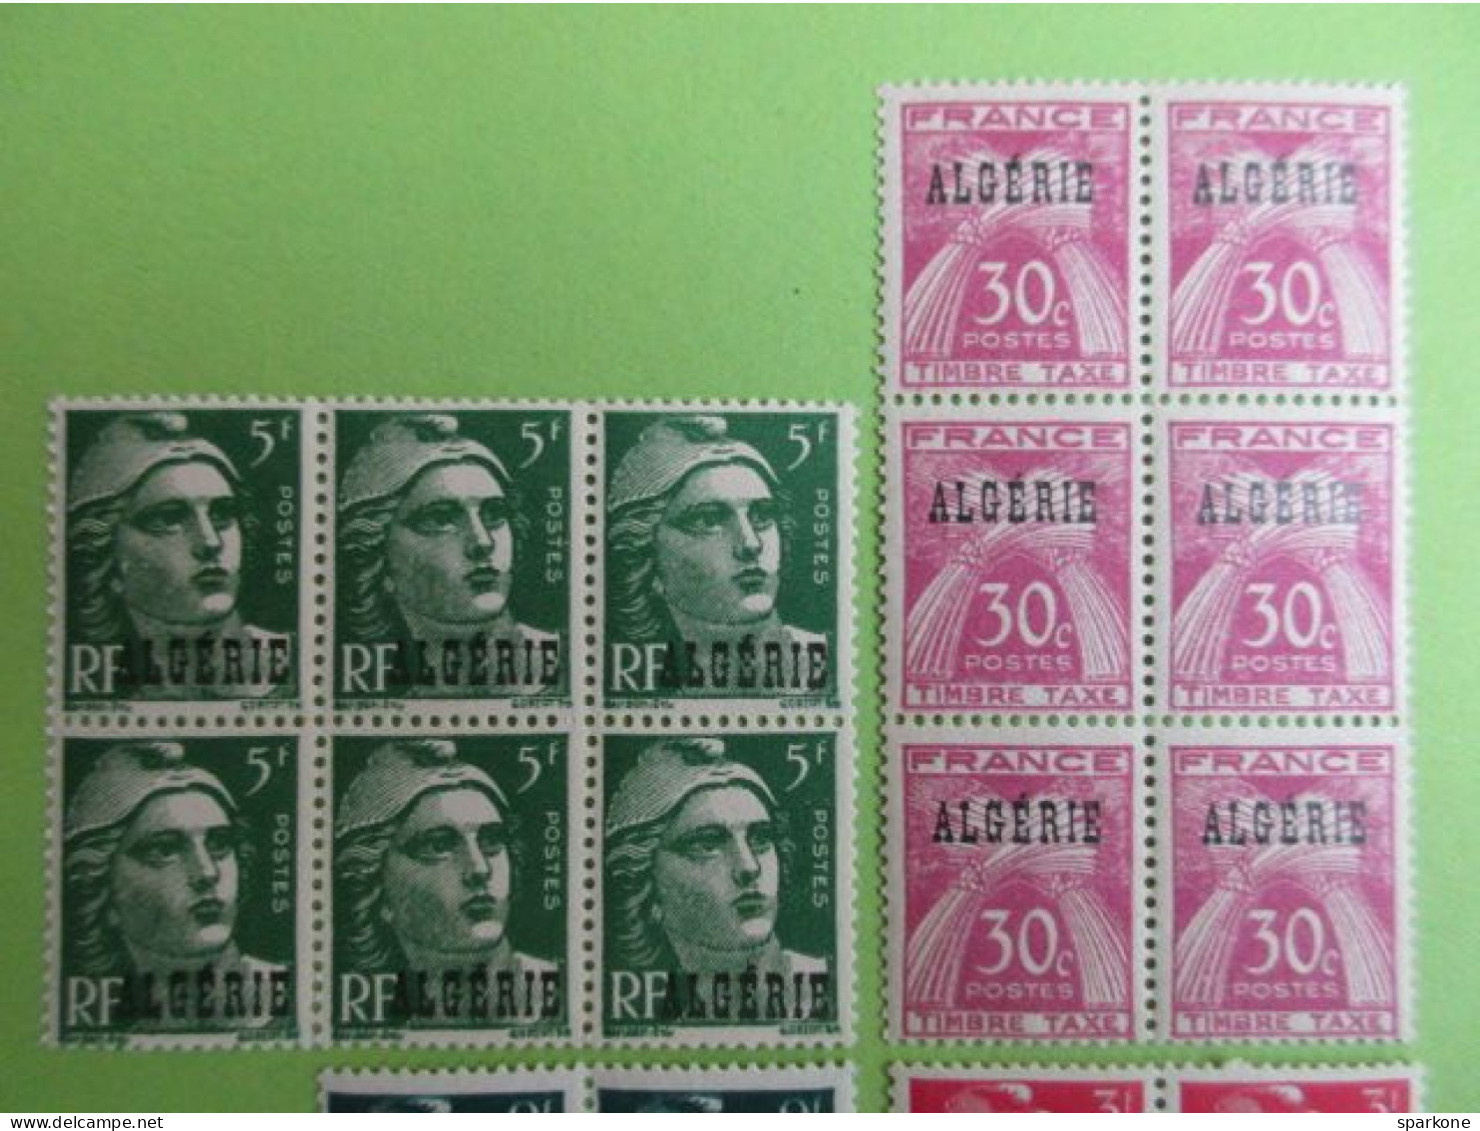 Lot Marianne Gandon - Surcharges Algerie - Timbres Taxe Surcharges Algérie - Bloc De 6 Timbres Neuf - Collezioni & Lotti